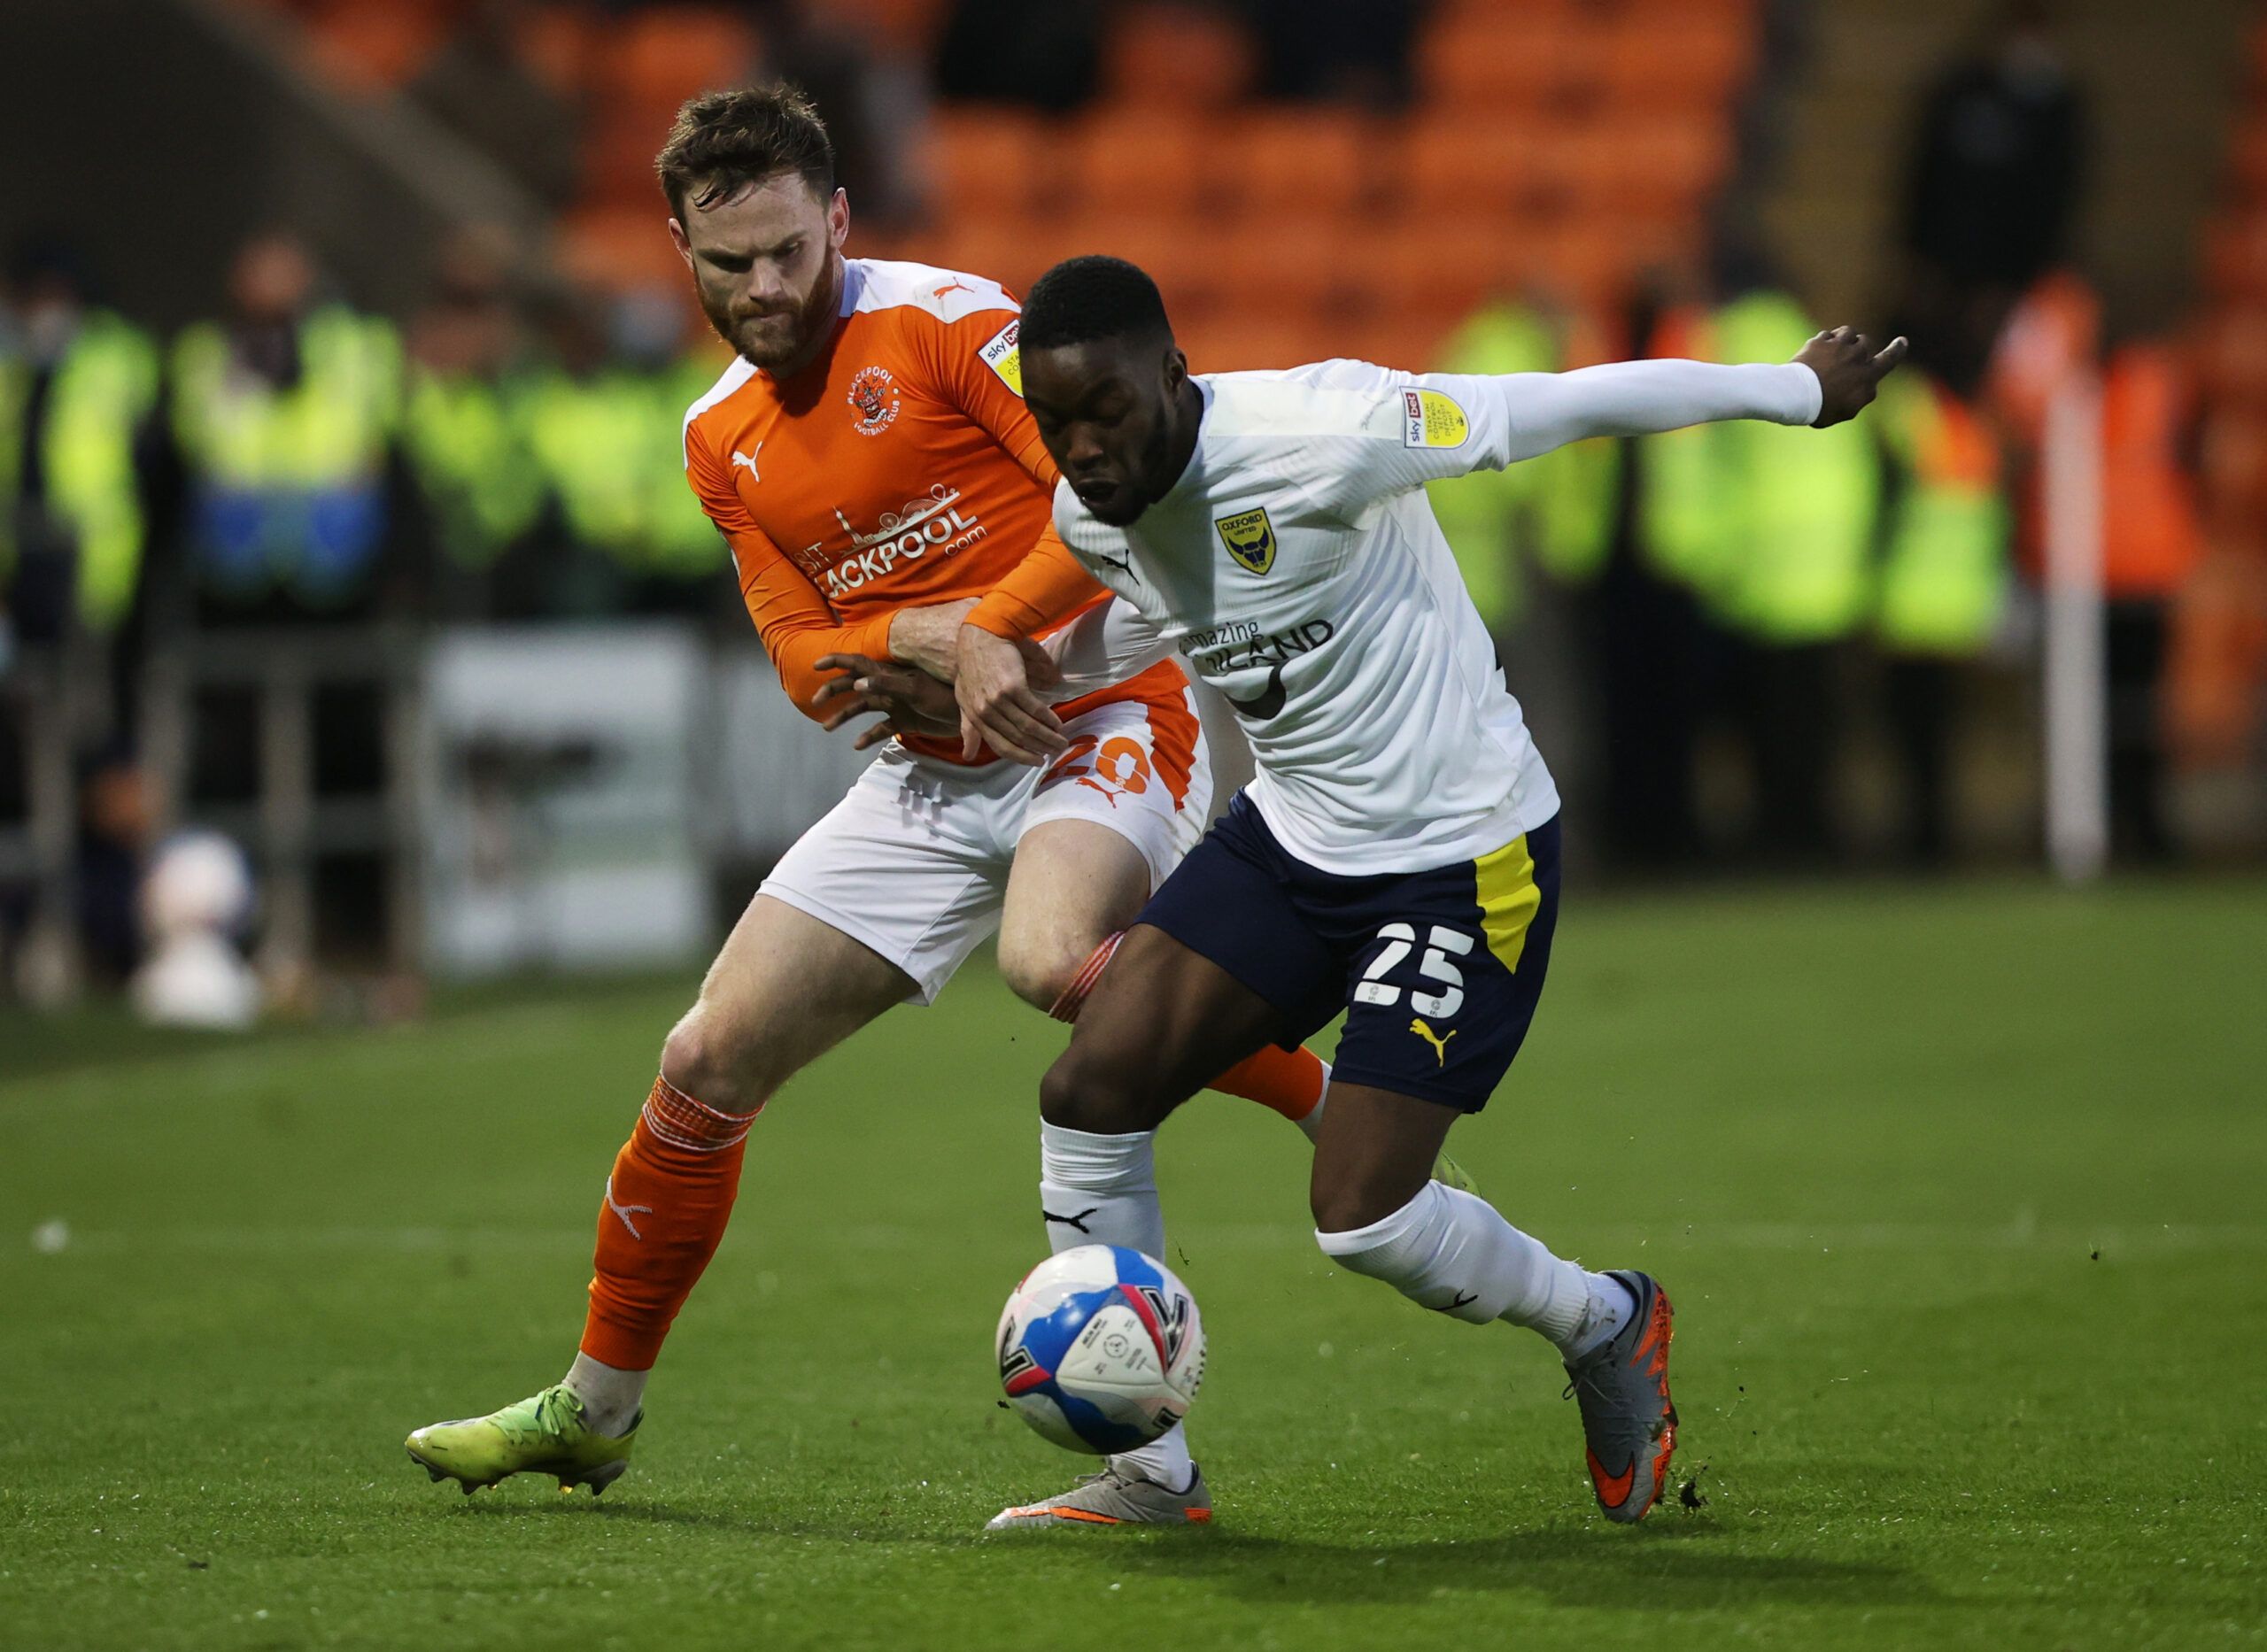 Soccer Football - League One Play-Off Semi Final Second Leg - Blackpool v Oxford United - Bloomfield Road Stadium, Blackpool, Britain - May 21, 2021 Blackpool's Oliver Turton in action with Oxford United's Olamide Shodipo Action Images/Molly Darlington EDITORIAL USE ONLY. No use with unauthorized audio, video, data, fixture lists, club/league logos or 'live' services. Online in-match use limited to 75 images, no video emulation. No use in betting, games or single club /league/player publications